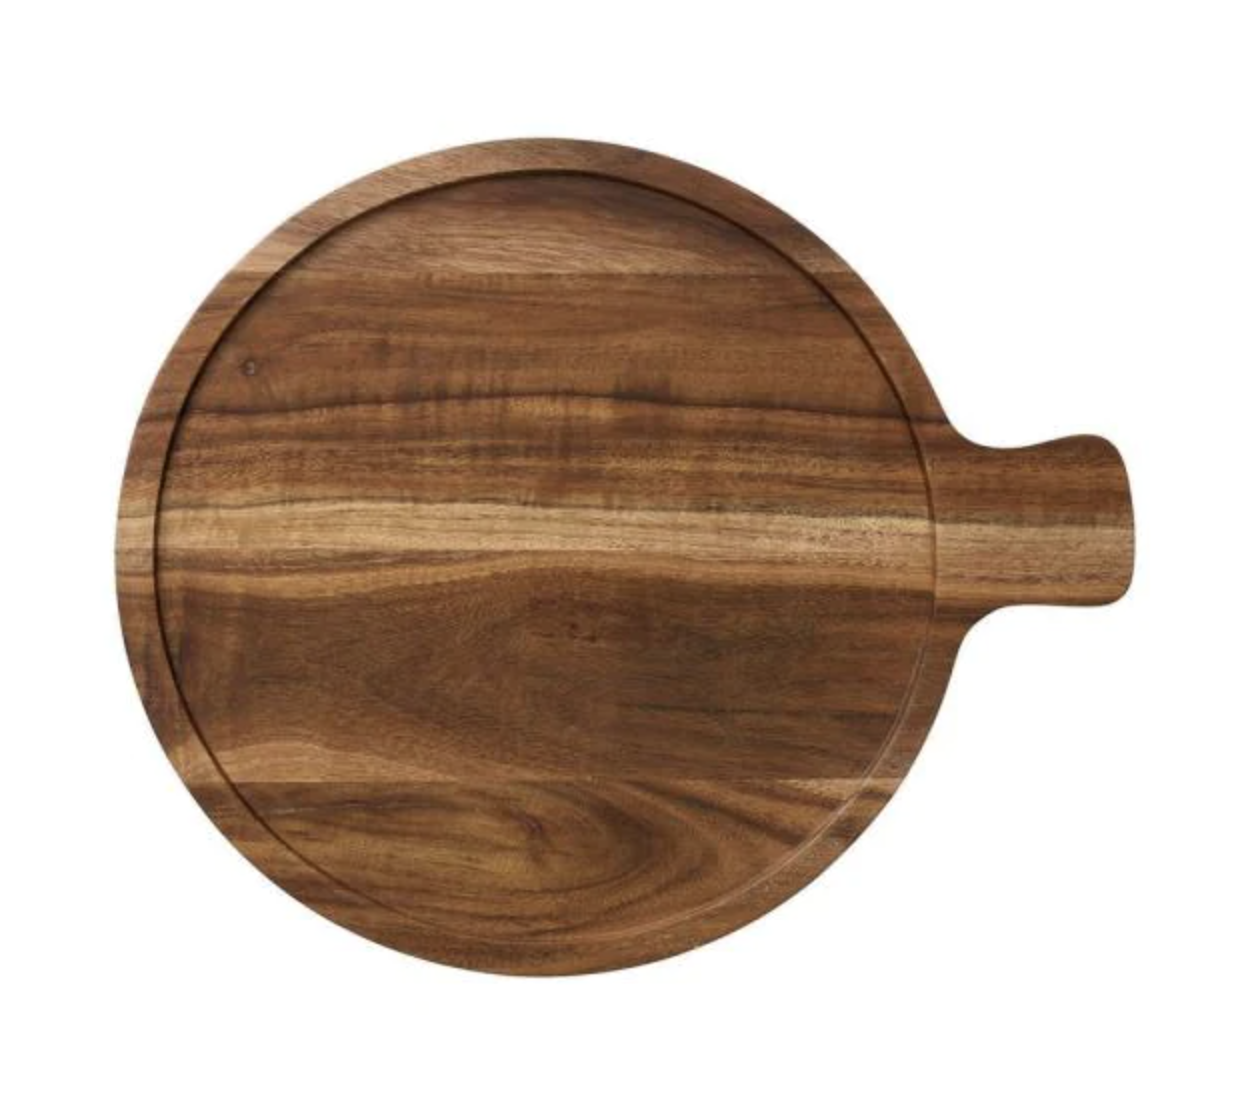 ARTESANO 9-1/2 IN. WOOD TRAY COVER FOR VEGETABLE SALAD BOWL